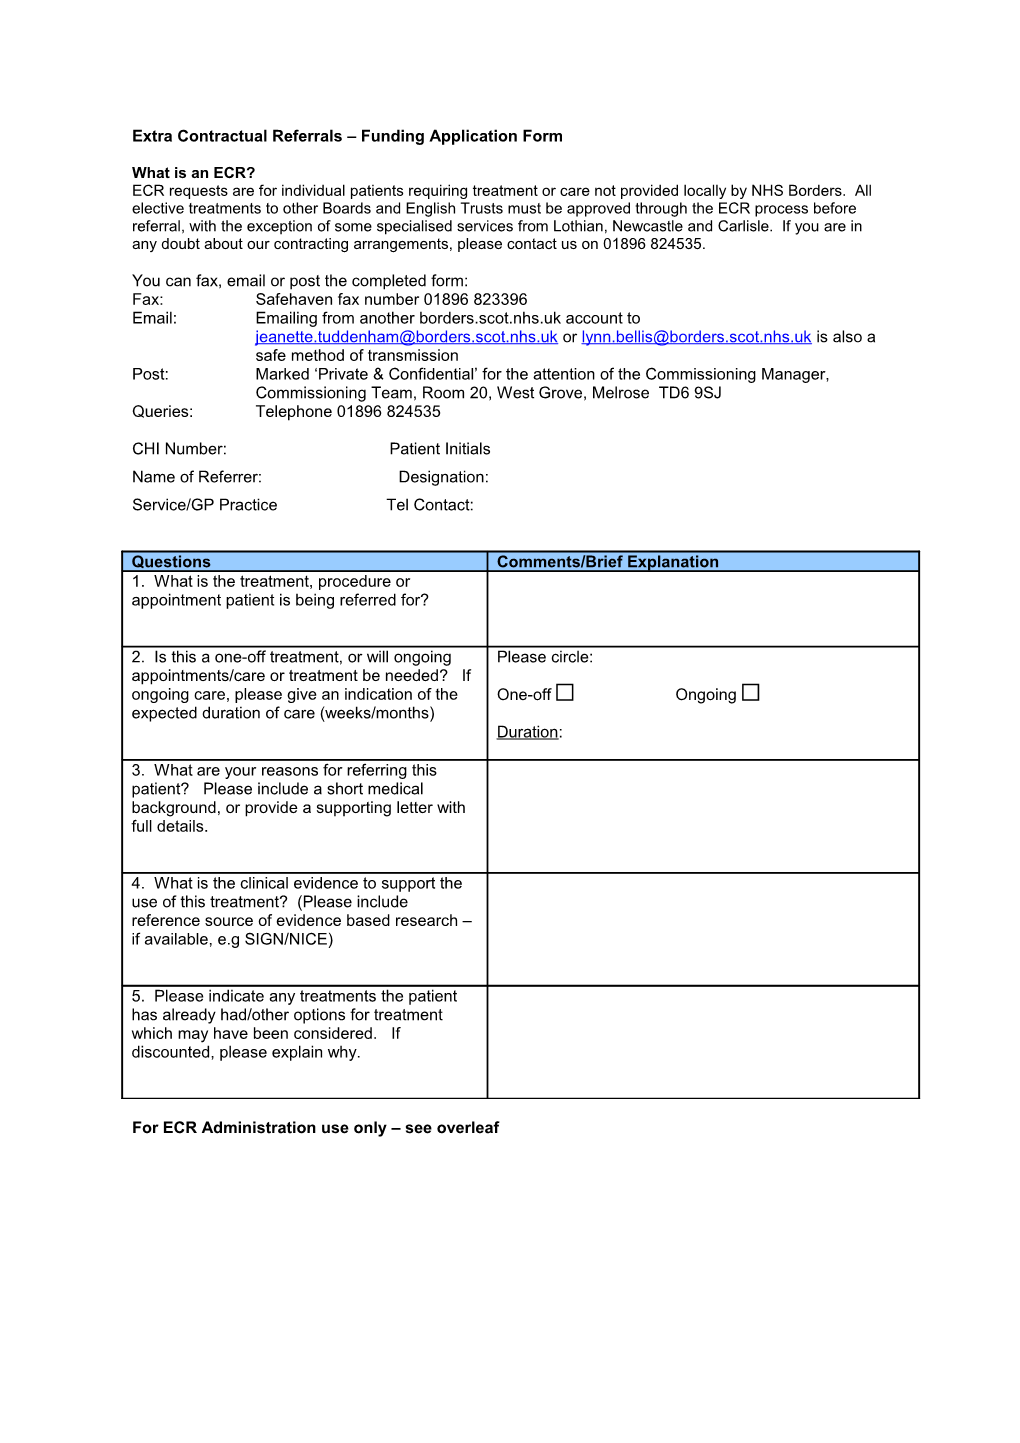 Extra Contractual Referrals Funding Application Form